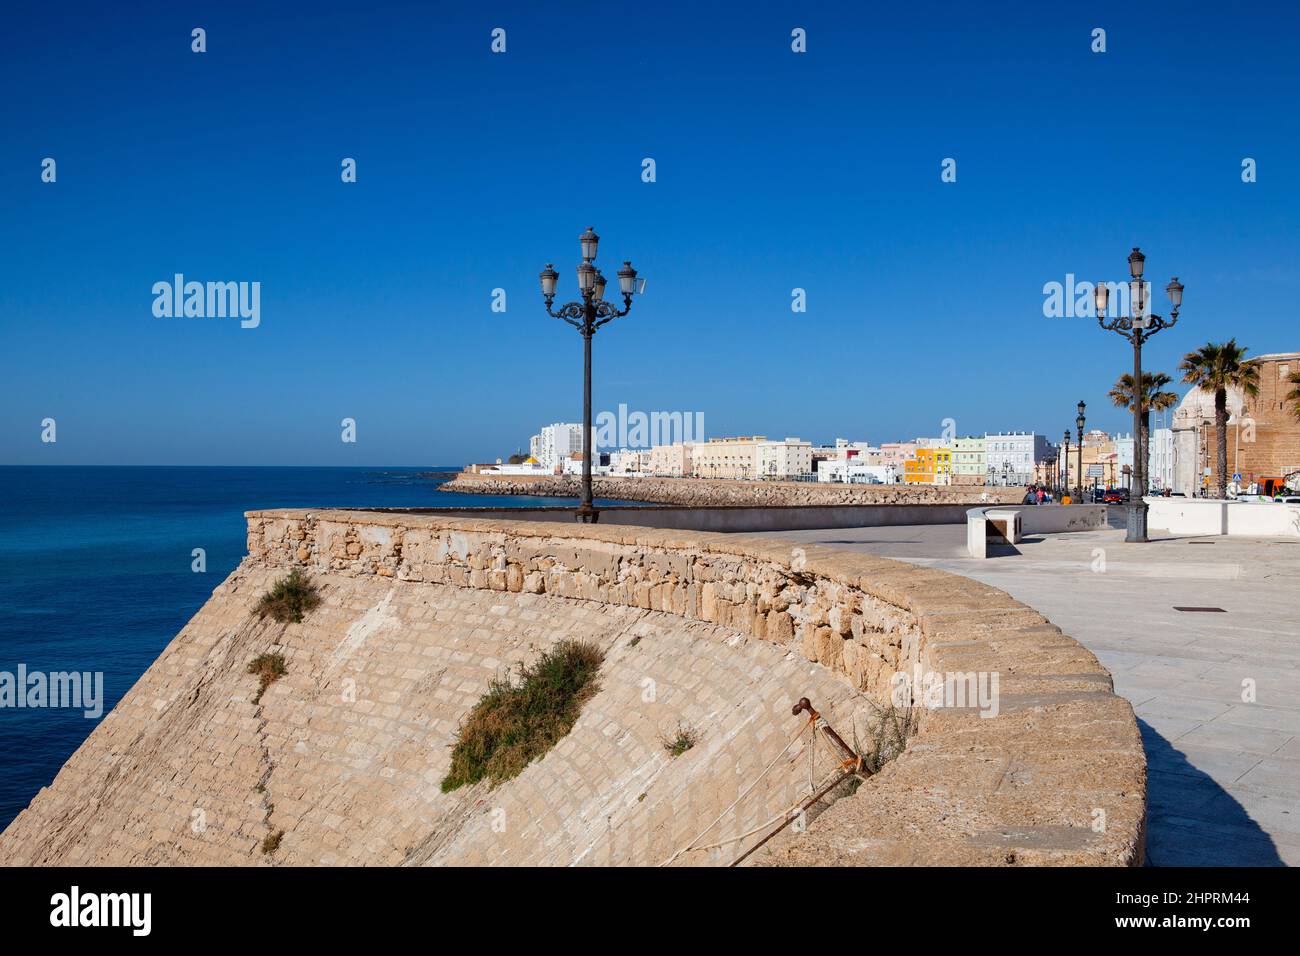 On the Promenade Paseo Canalejas, Cadiz, Andalusia, Spain. The place is perfect for romantic walk! Stock Photo